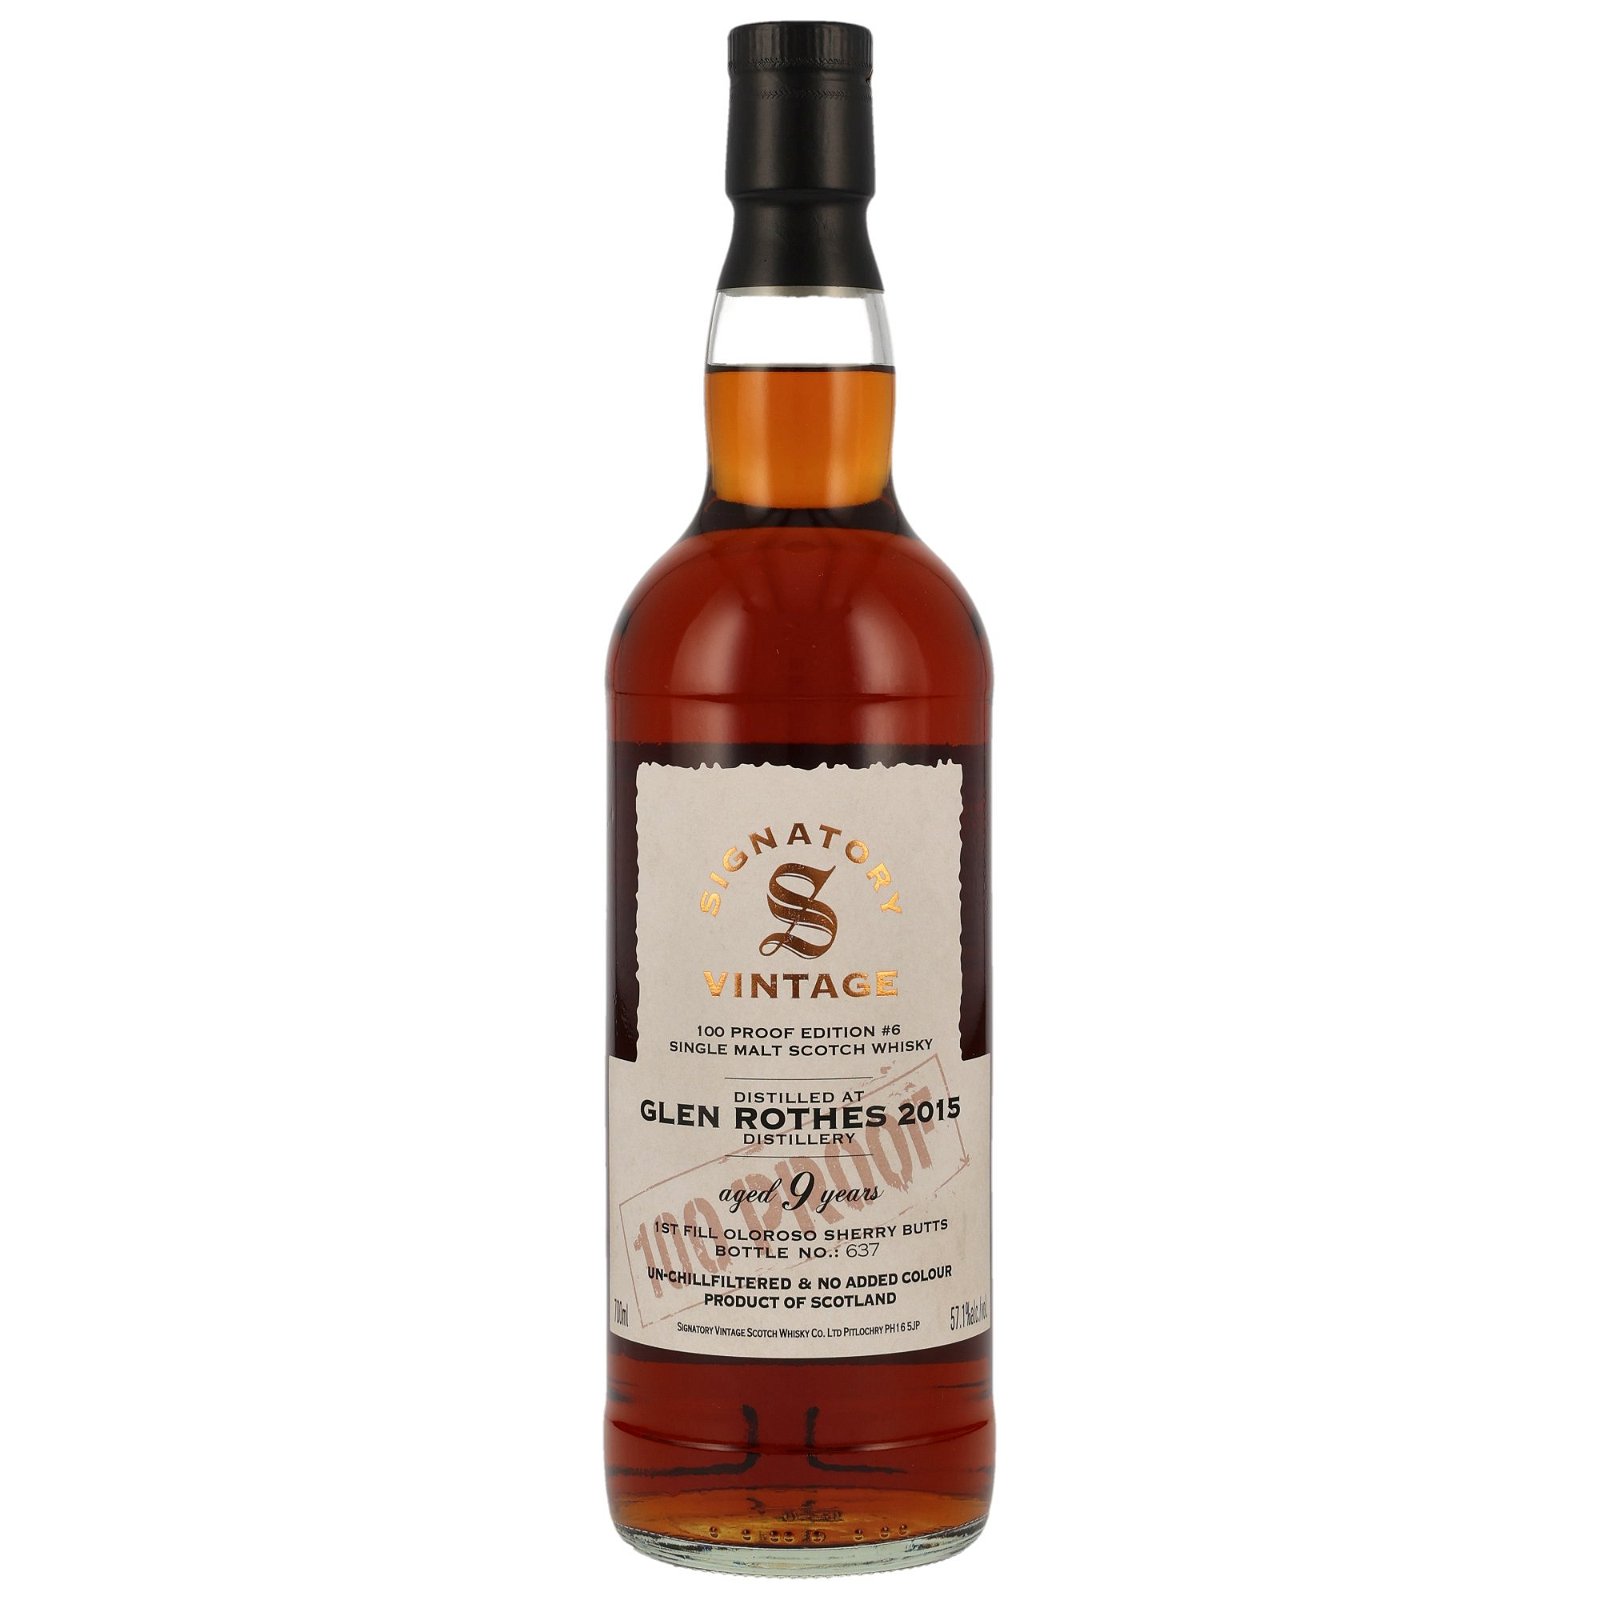 Glen Rothes 2015 - 9 Jahre 1st Fill Oloroso Sherry Butts 100 Proof Edition #6 (Signatory)